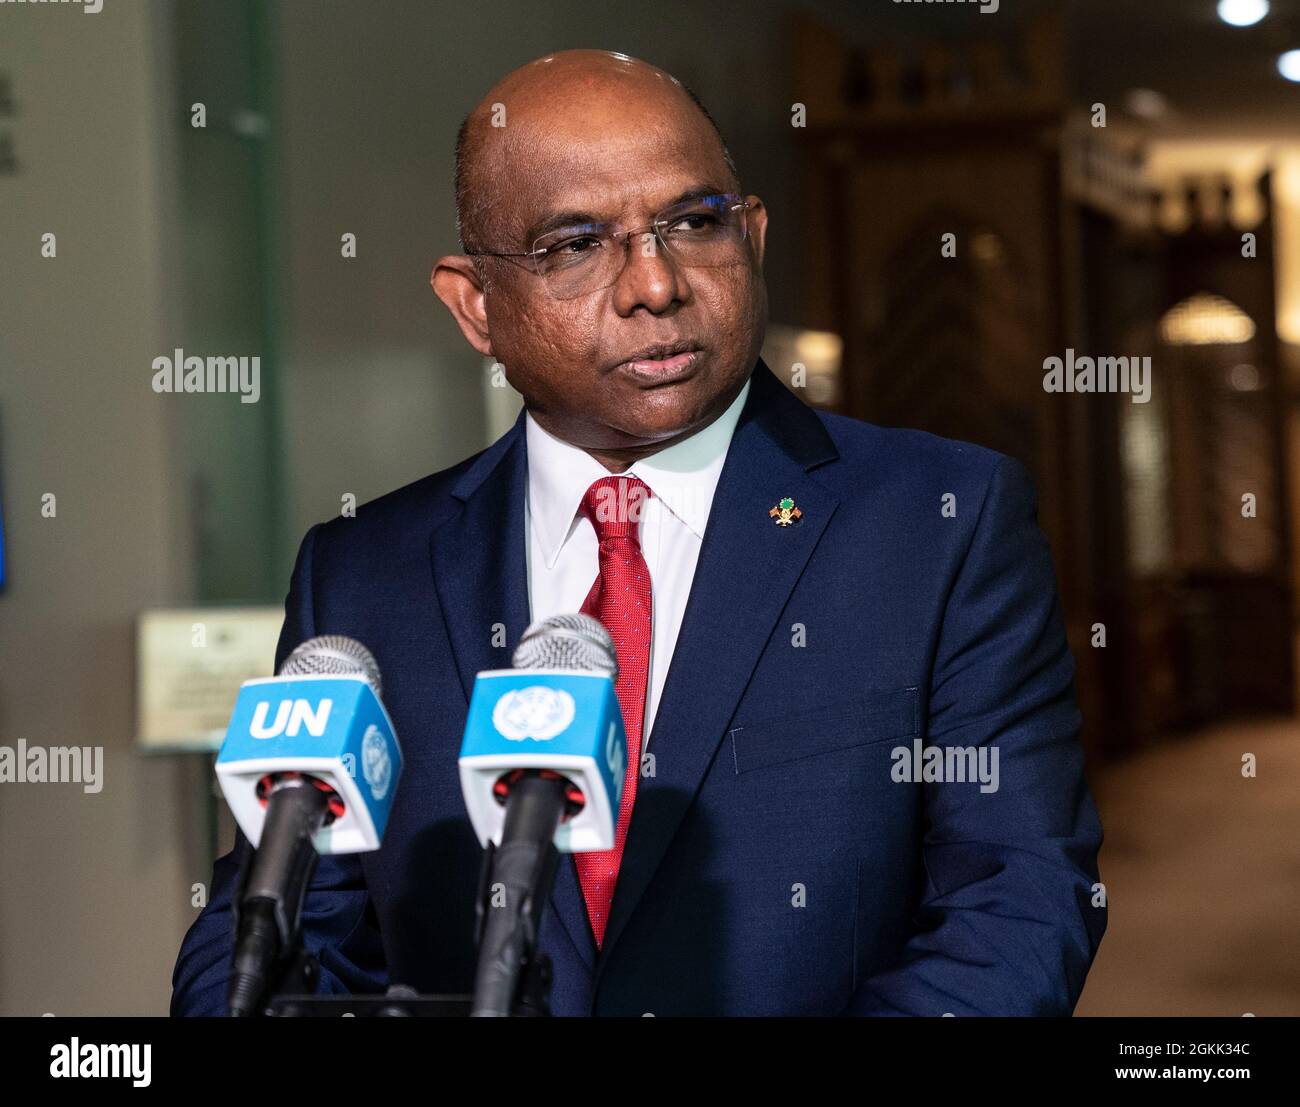 New York, NY - September 14, 2021: Abdulla Shahid conducts press conference after elected as President of 76th General Assembly at UN Headquarters Stock Photo